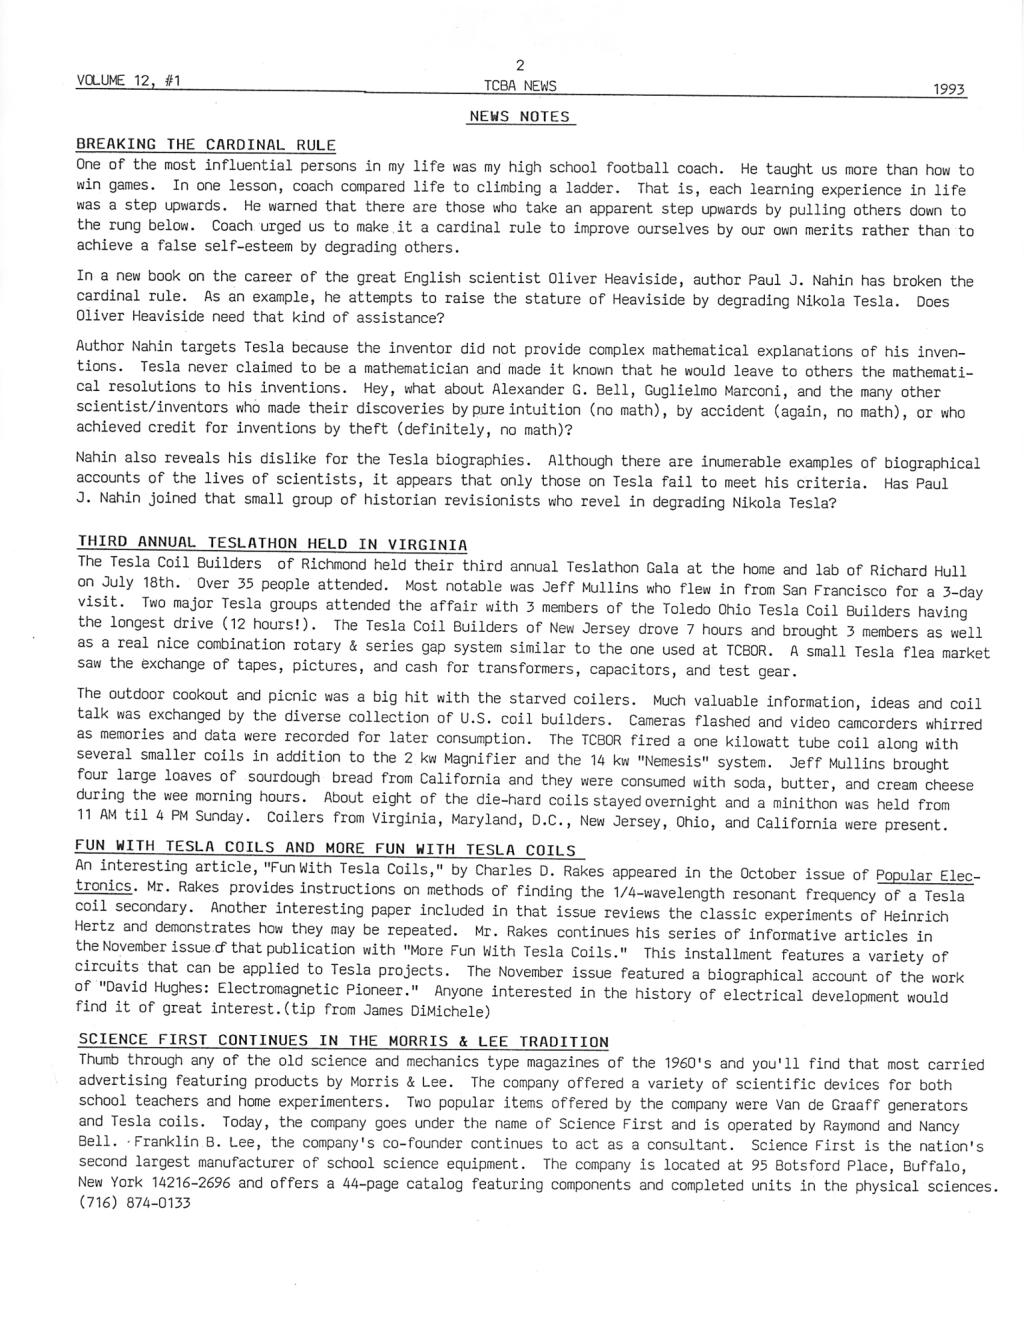 TCBA Volume 12 - Issue 1 - Page 2 of 18